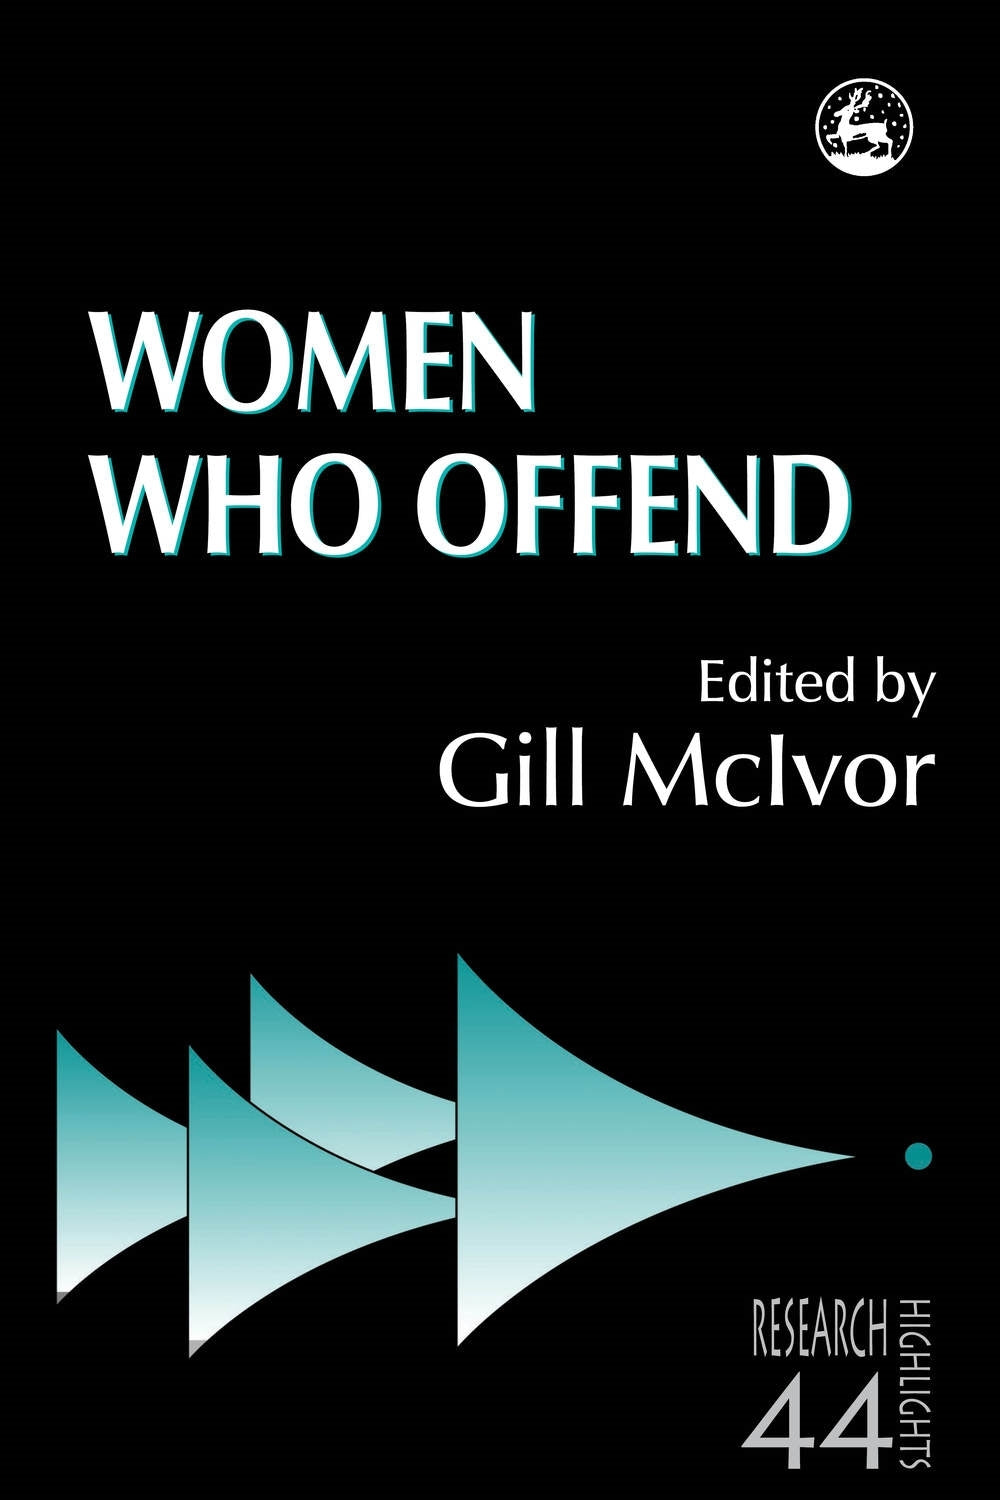 Women Who Offend by Gill McIvor